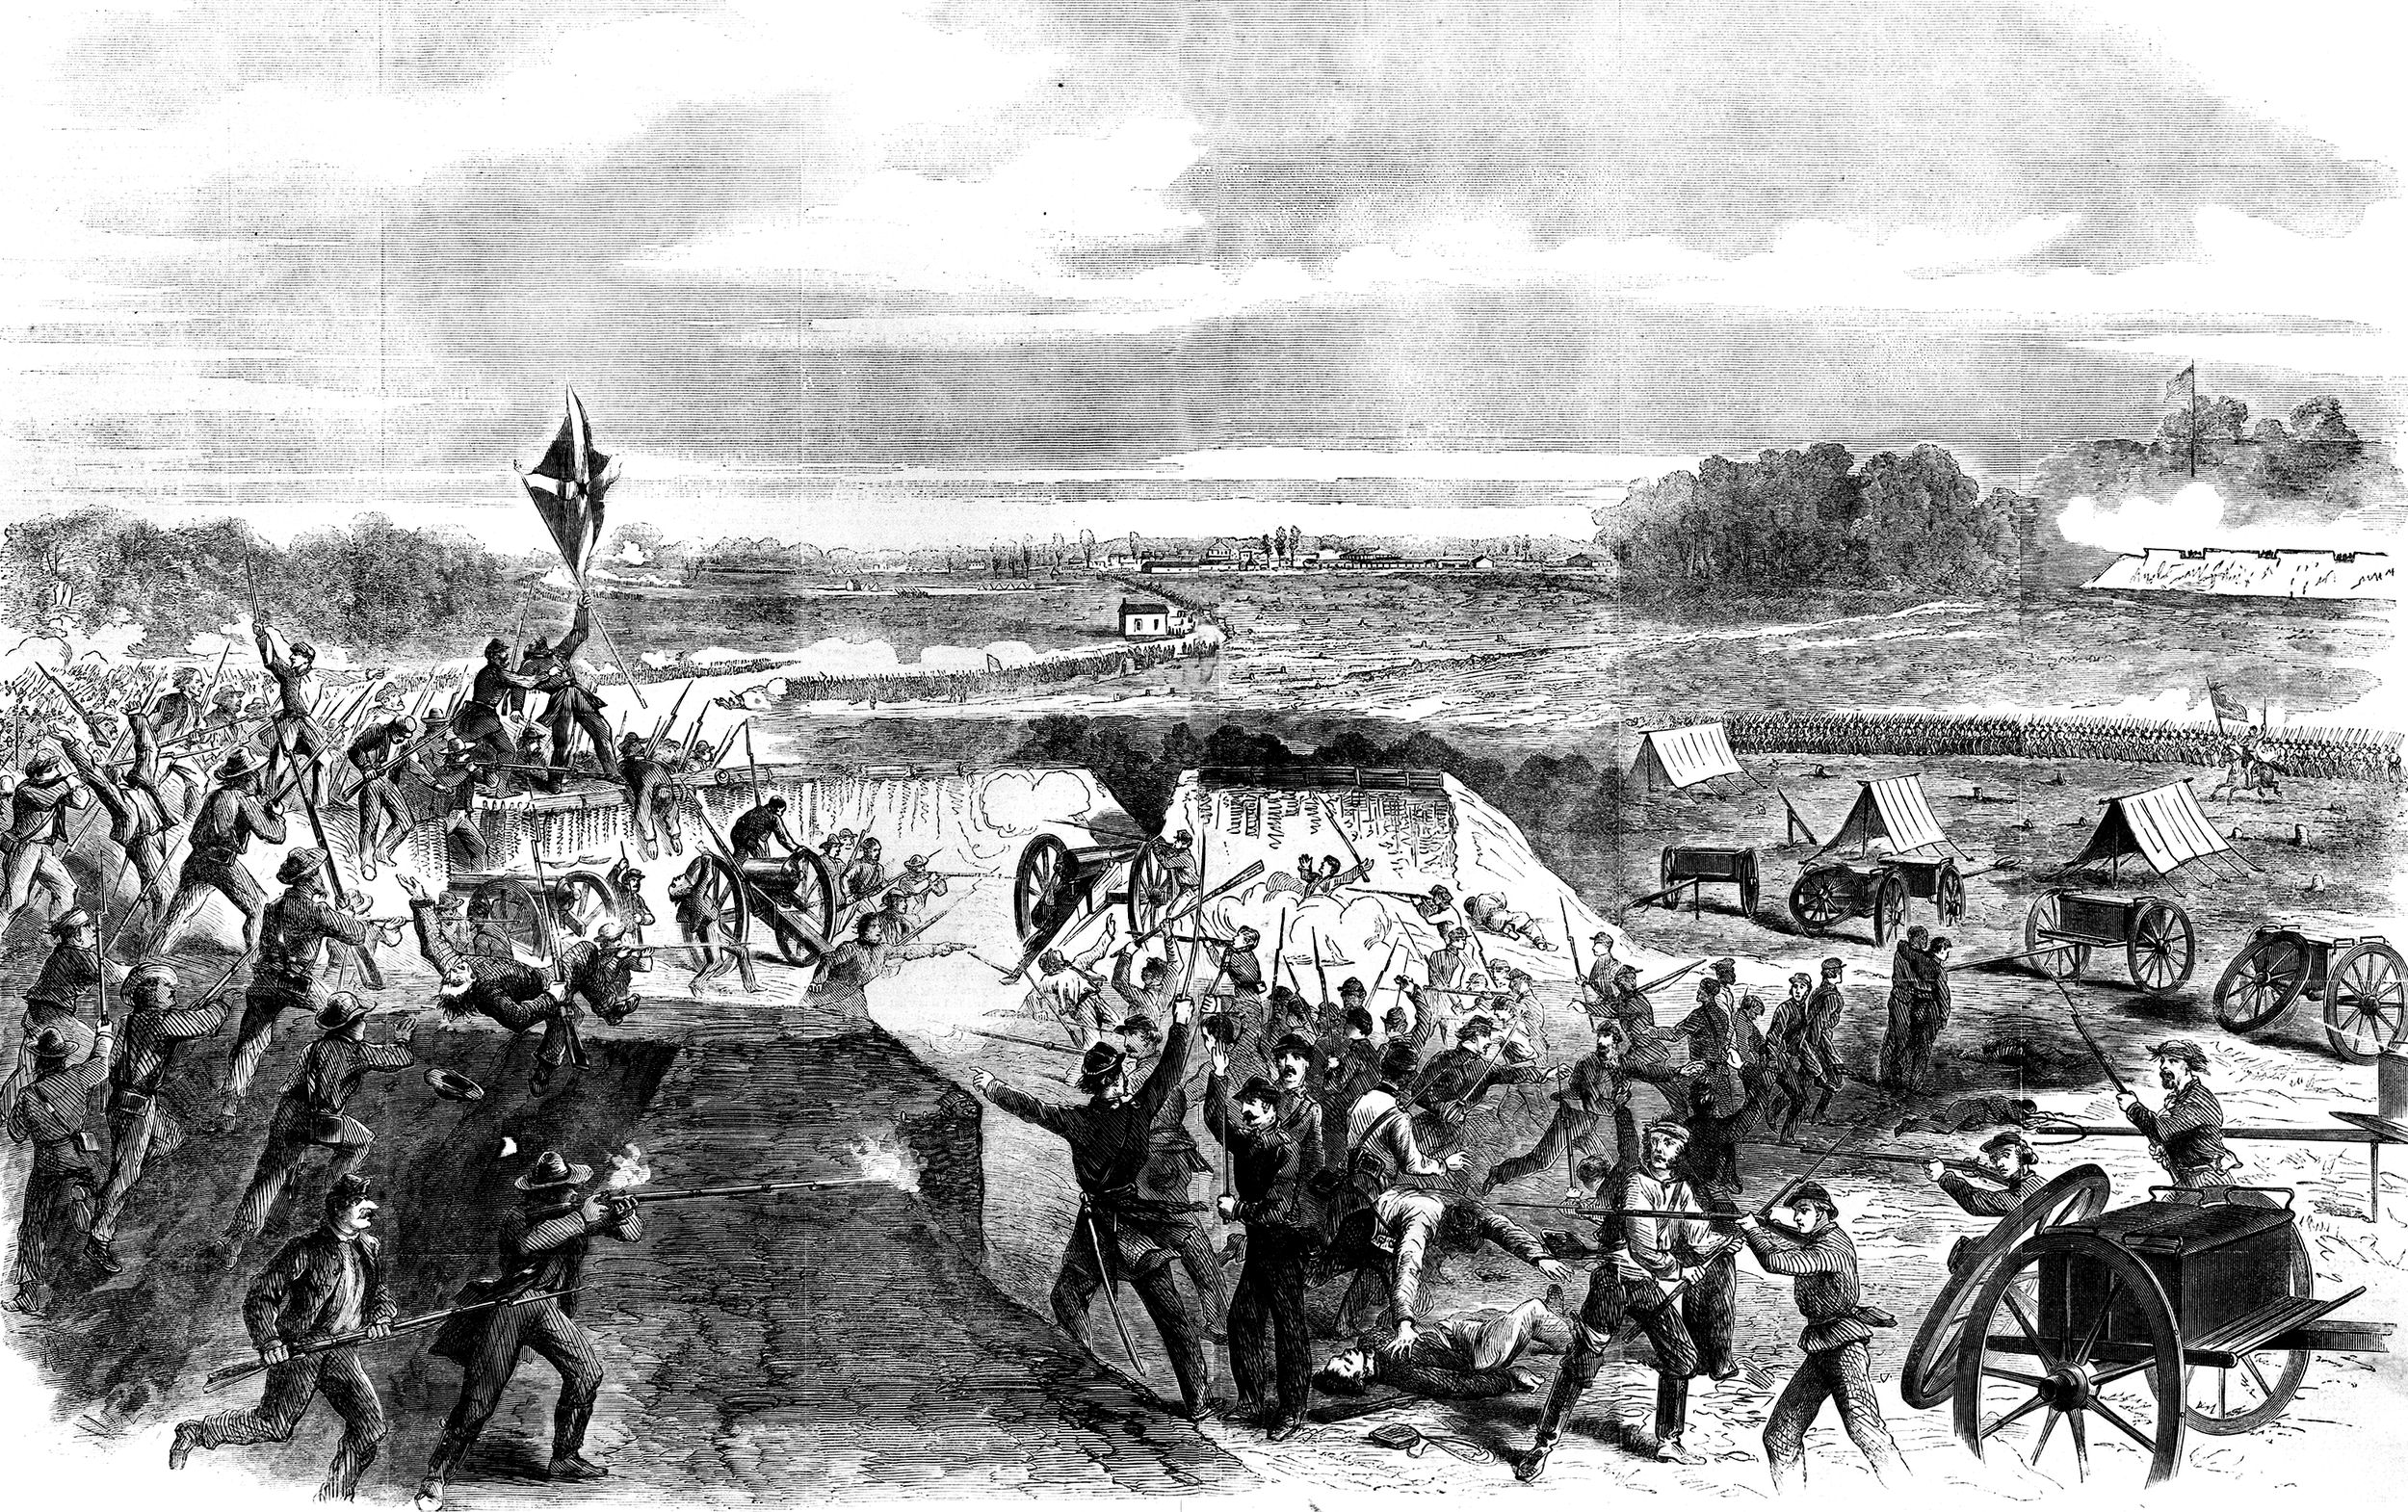 On October 3-4, 1862, a Confederate force of 65,000 under General Earl Van Dorn attacked the rail hub of Corinth, Mississippi, defended by 120,000 Federal troops. Confederate Brig. Gen. Dabney H. Maury tried three times to take the fortification known as Battery Robinett—the site of heavy fightng as depicted in this Harper’s Weekly illustration, based on a sketch by Alexander Simplot. As Gen. David S. Stanley’s division came up to support the battery, some Confederates were able to find a gap in the line to enter the city of Corinth, but were driven out by a strong Federal counterattack.